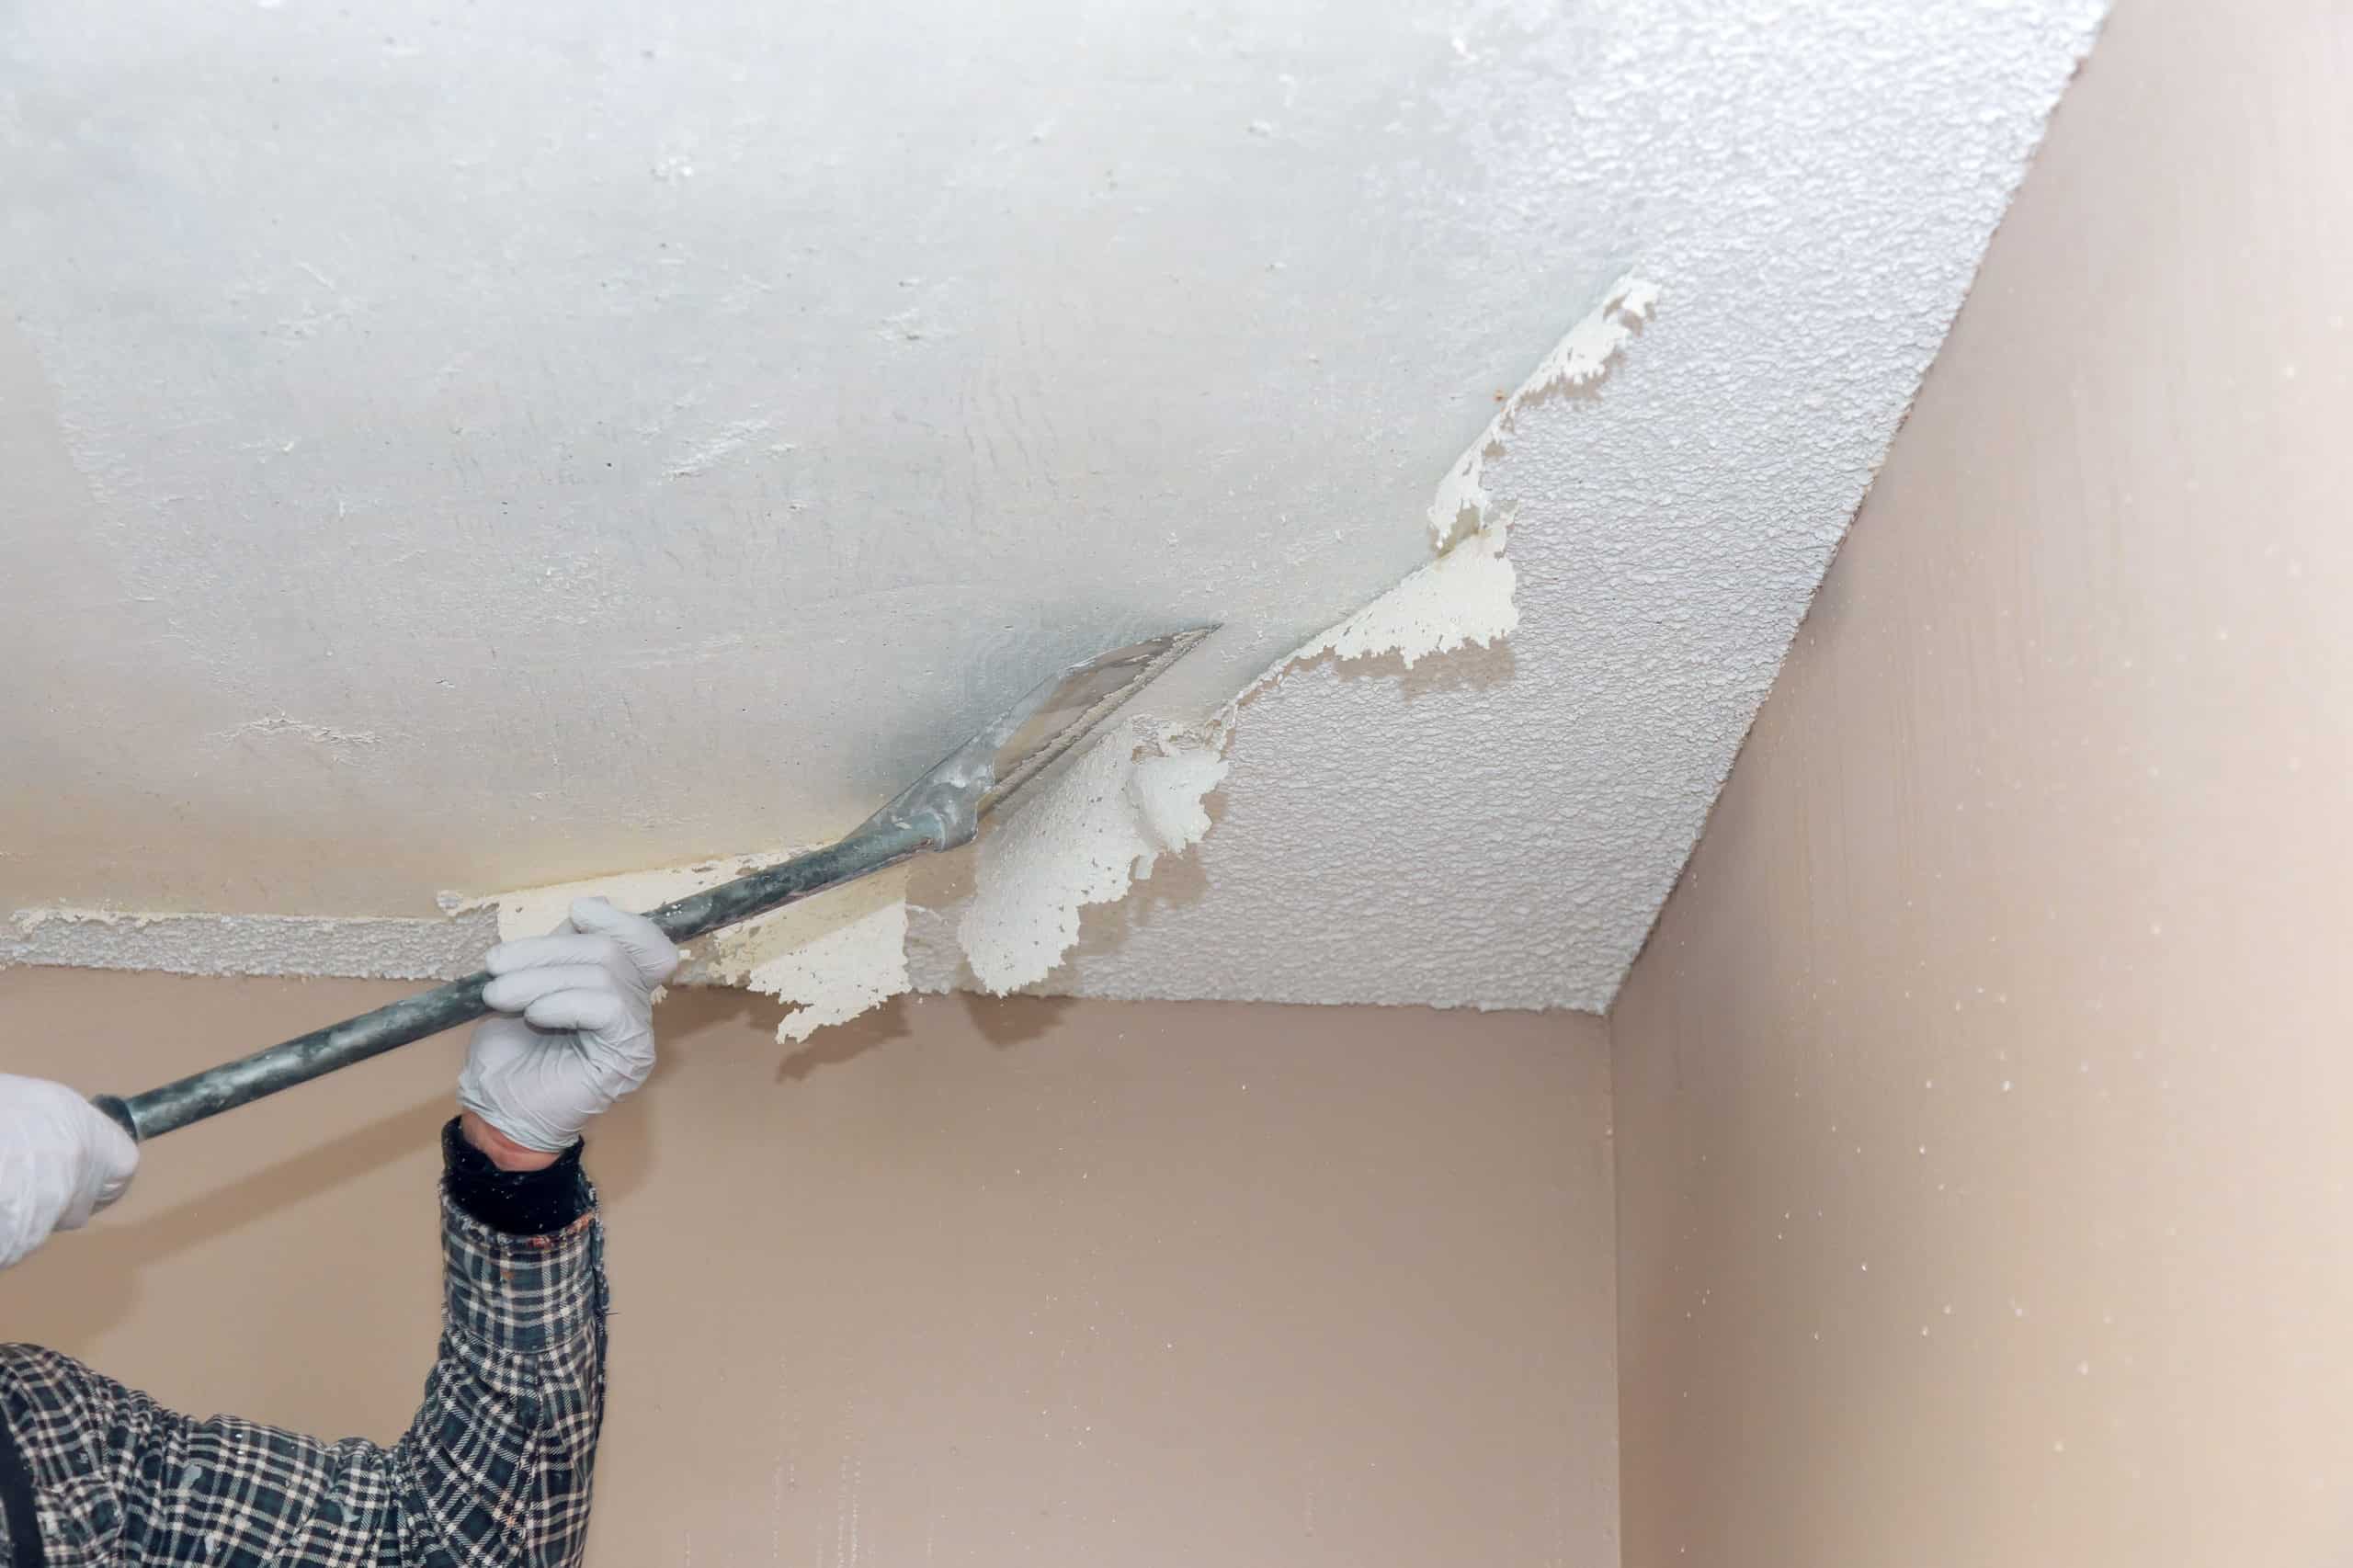 https://wallapainting.com/wp-content/uploads/2022/04/Removing-Popcorn-Ceiling-scaled.jpg